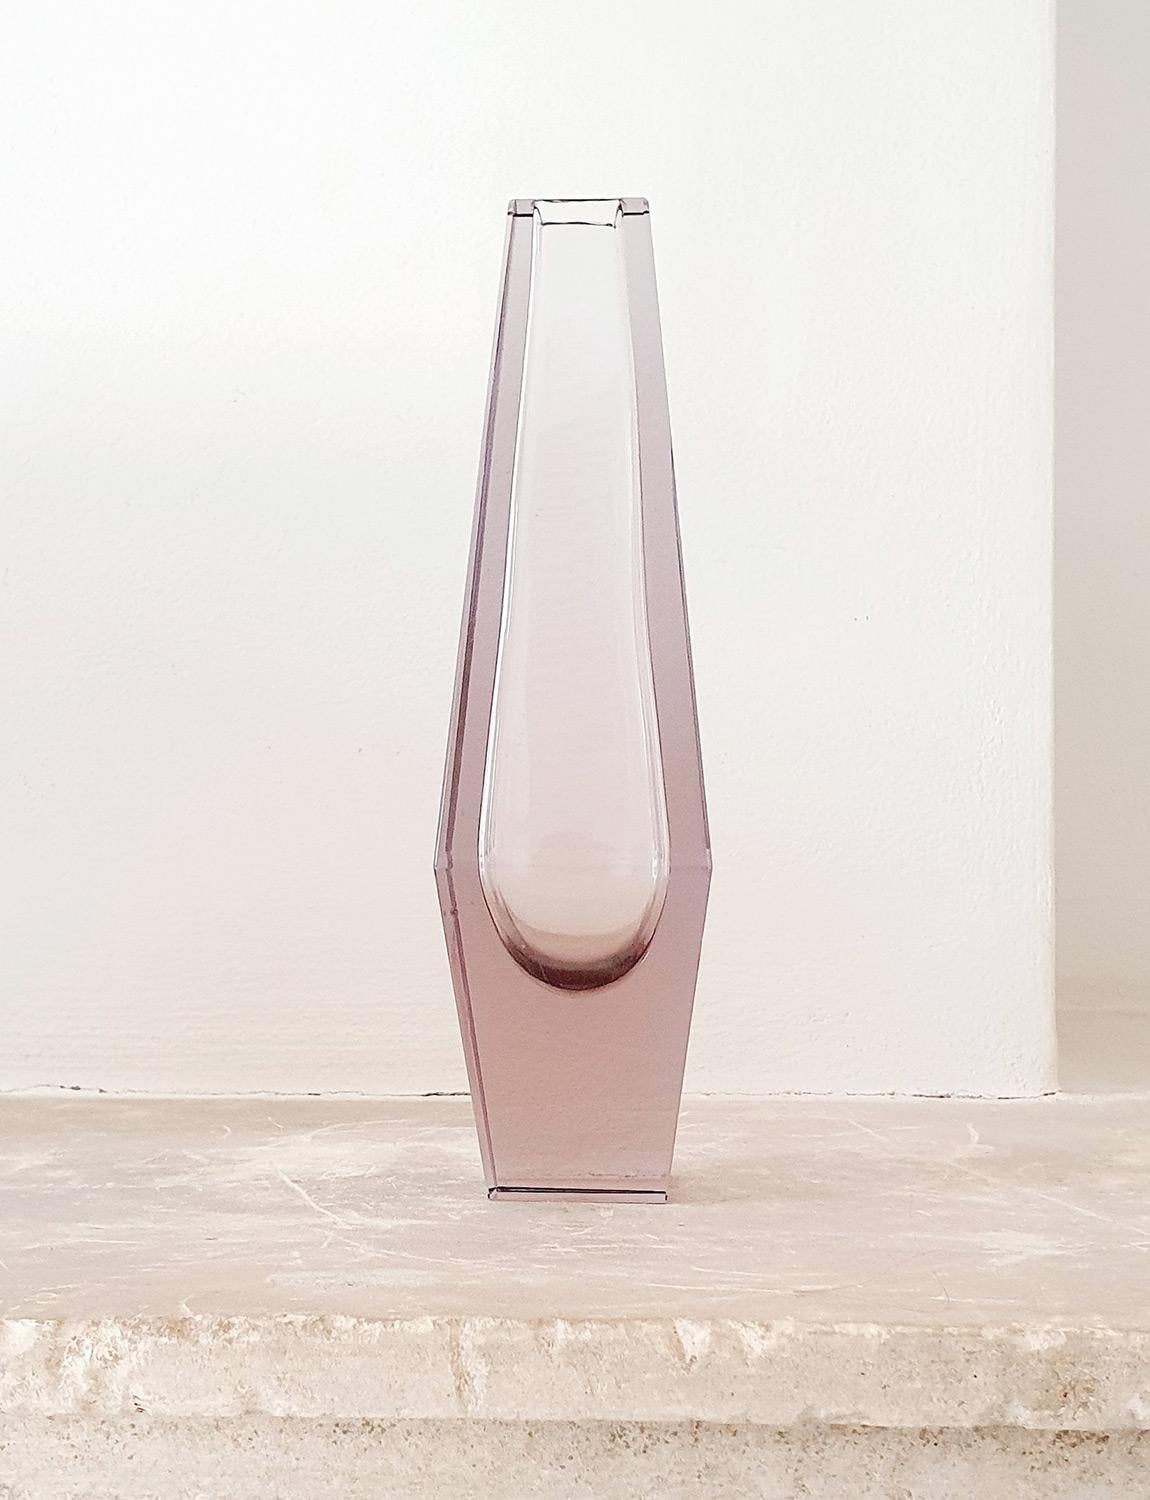 Elegant 1960s hand blown faceted Alessandro Mandruzzato vase. hand blown in Murano, Venice in the 1960s and found here in Italy. This wonderful geometric vase is a pale dusty pink colour. This piece is in excellent condition. It sits elegantly